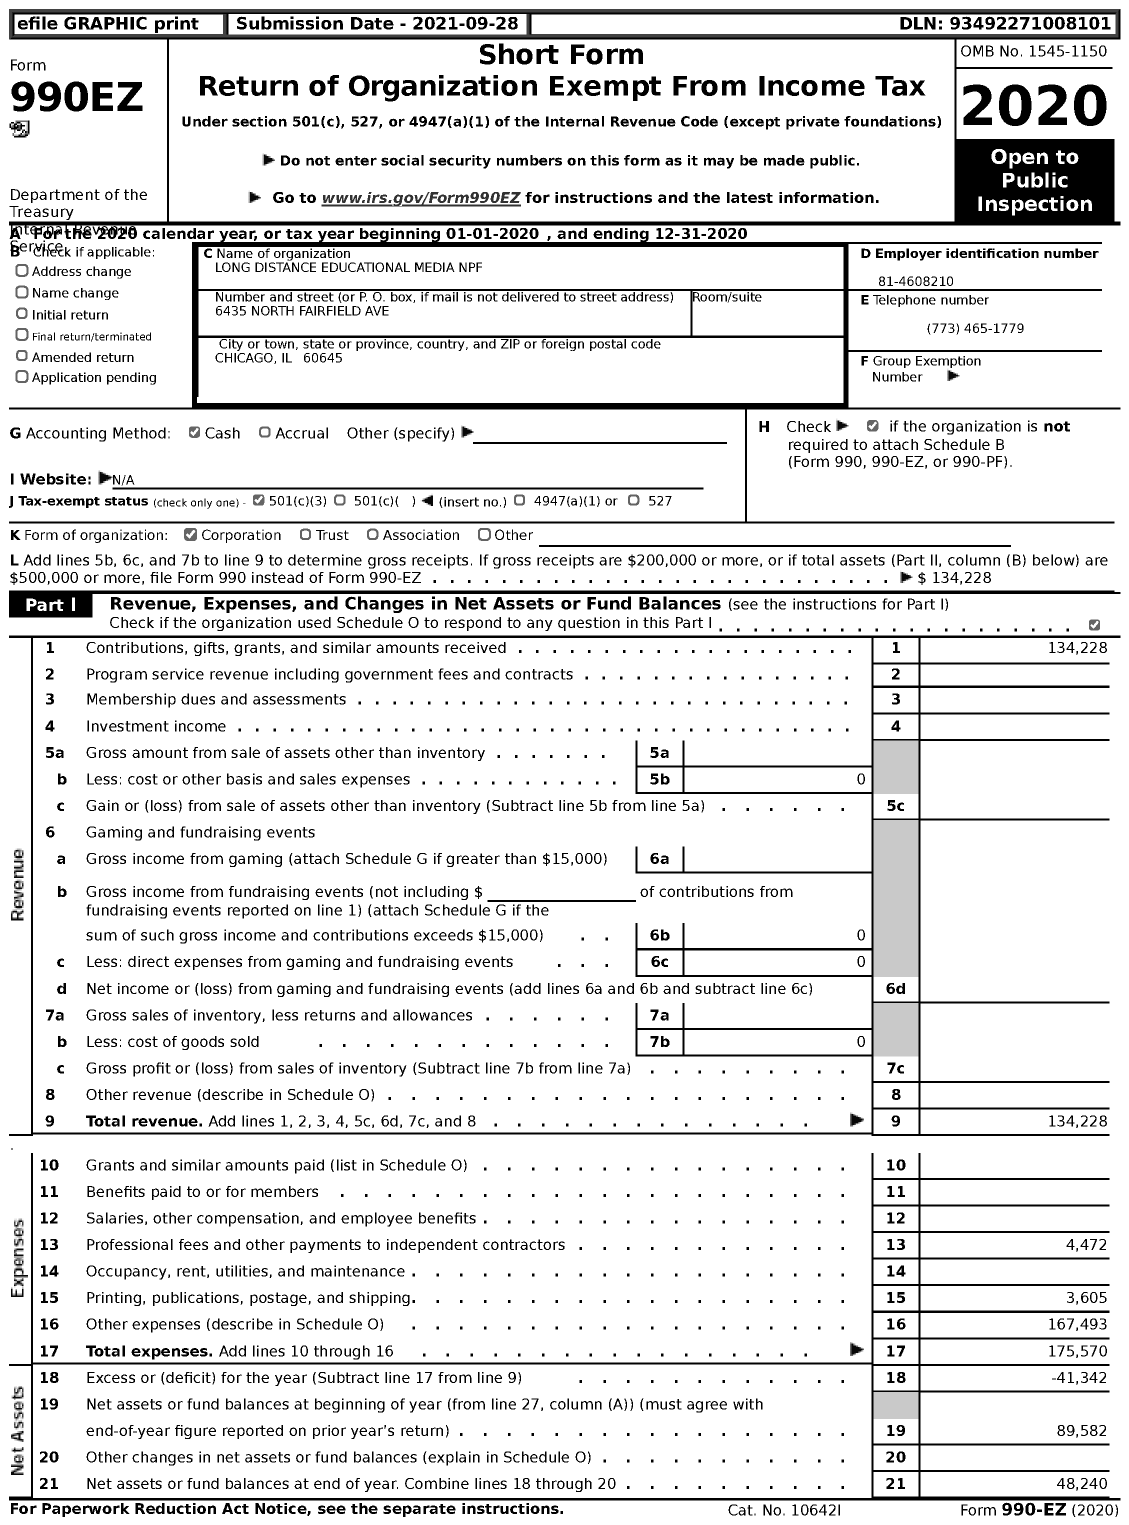 Image of first page of 2020 Form 990EZ for Long Distance Educational Media NPF